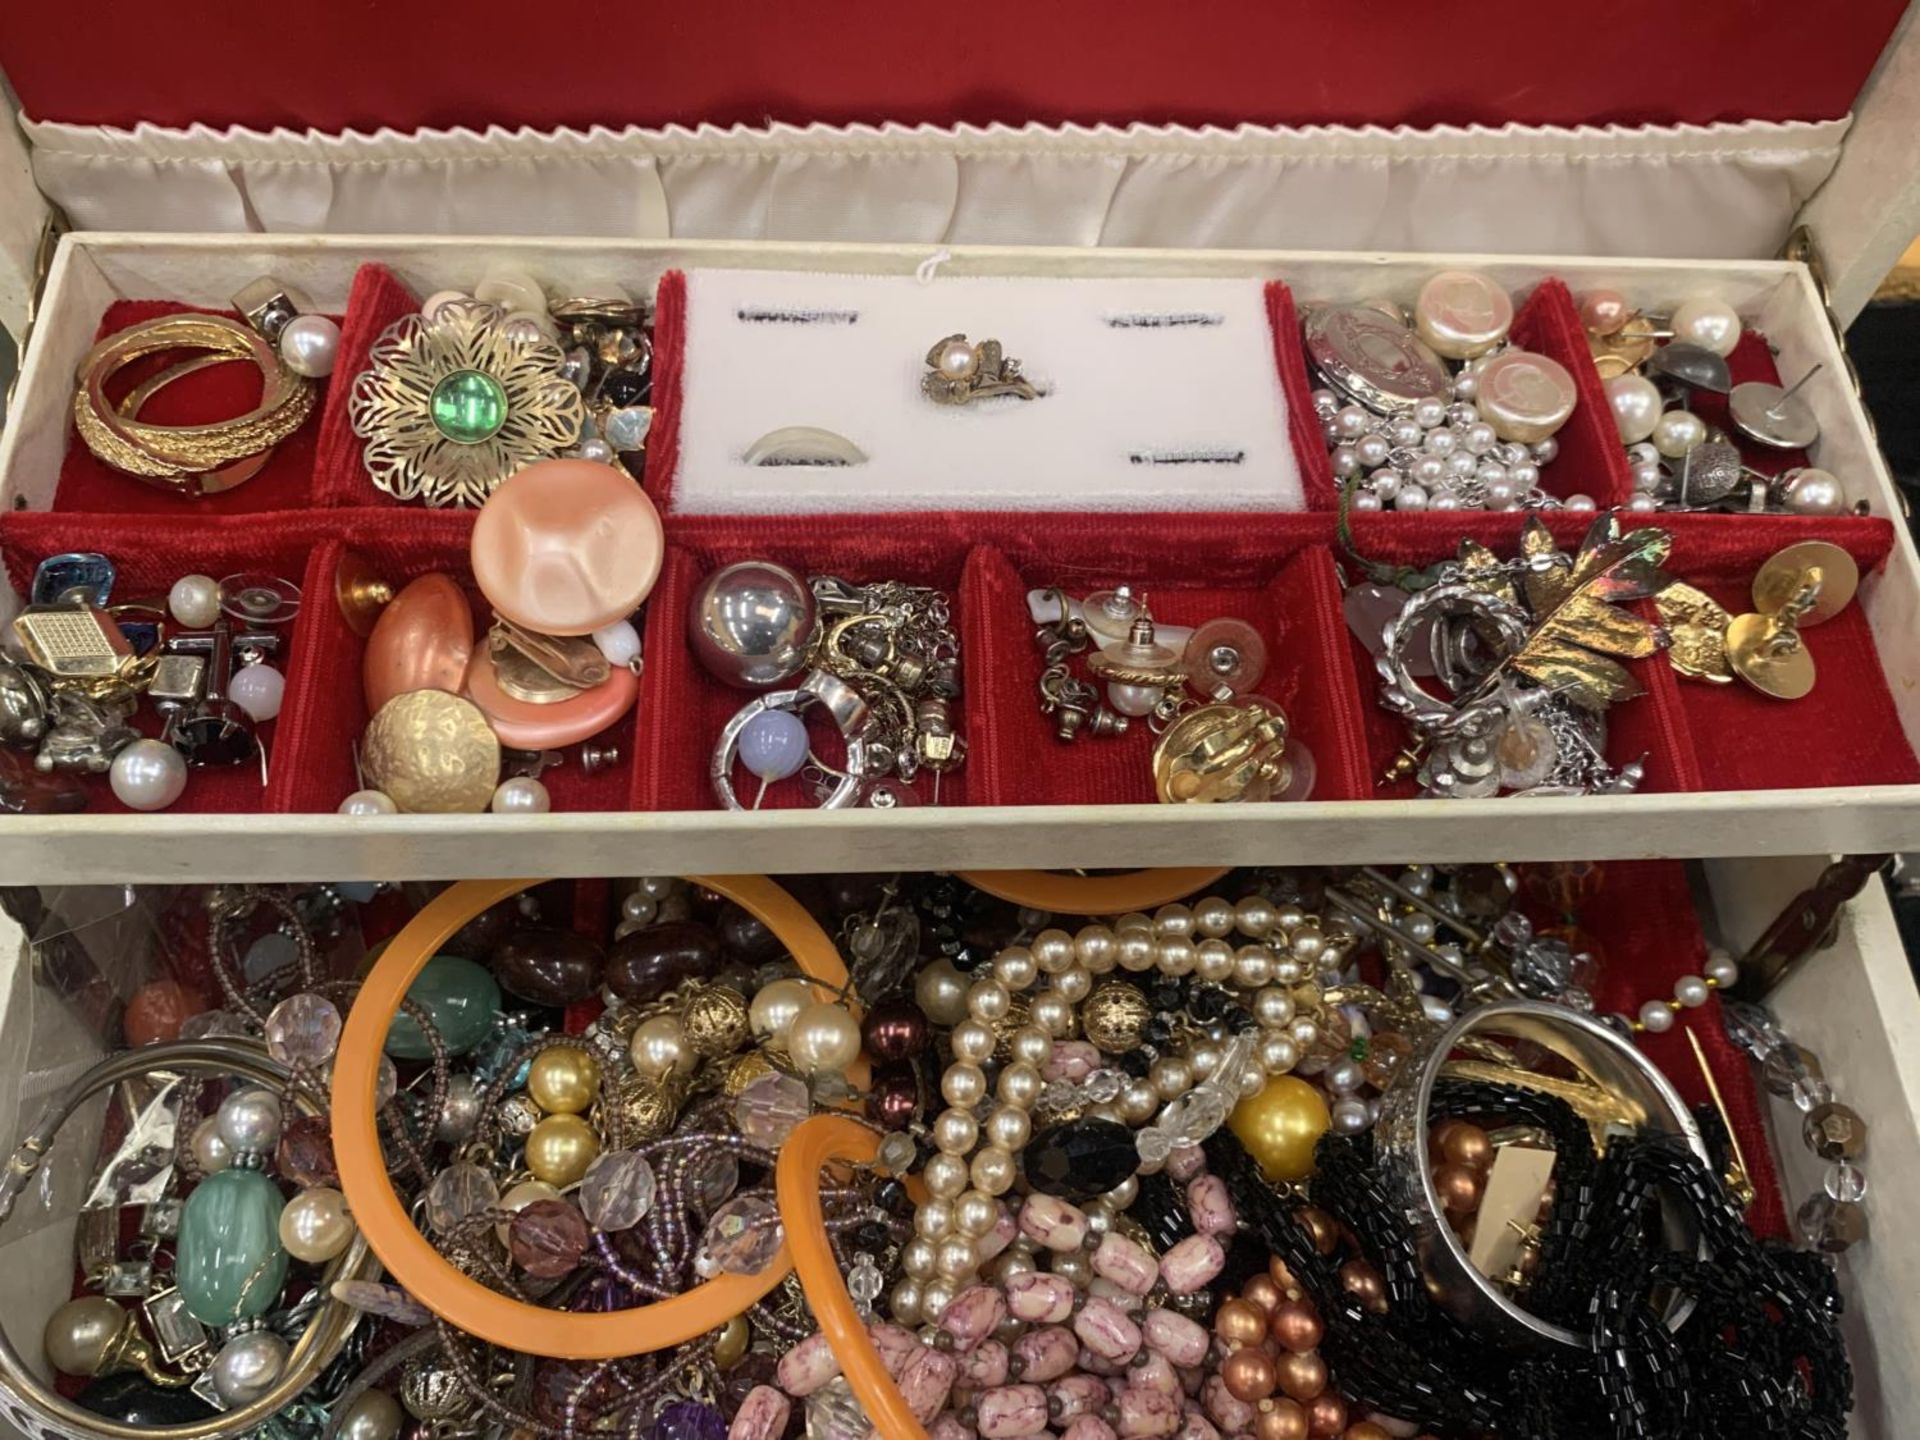 A LARGE QUANTITY OF COSTUME JEWELLERY TO INCLUDE PEARLS, NECKLACES, BEADS, EARRINGS, BANGLES, ETC IN - Image 4 of 4